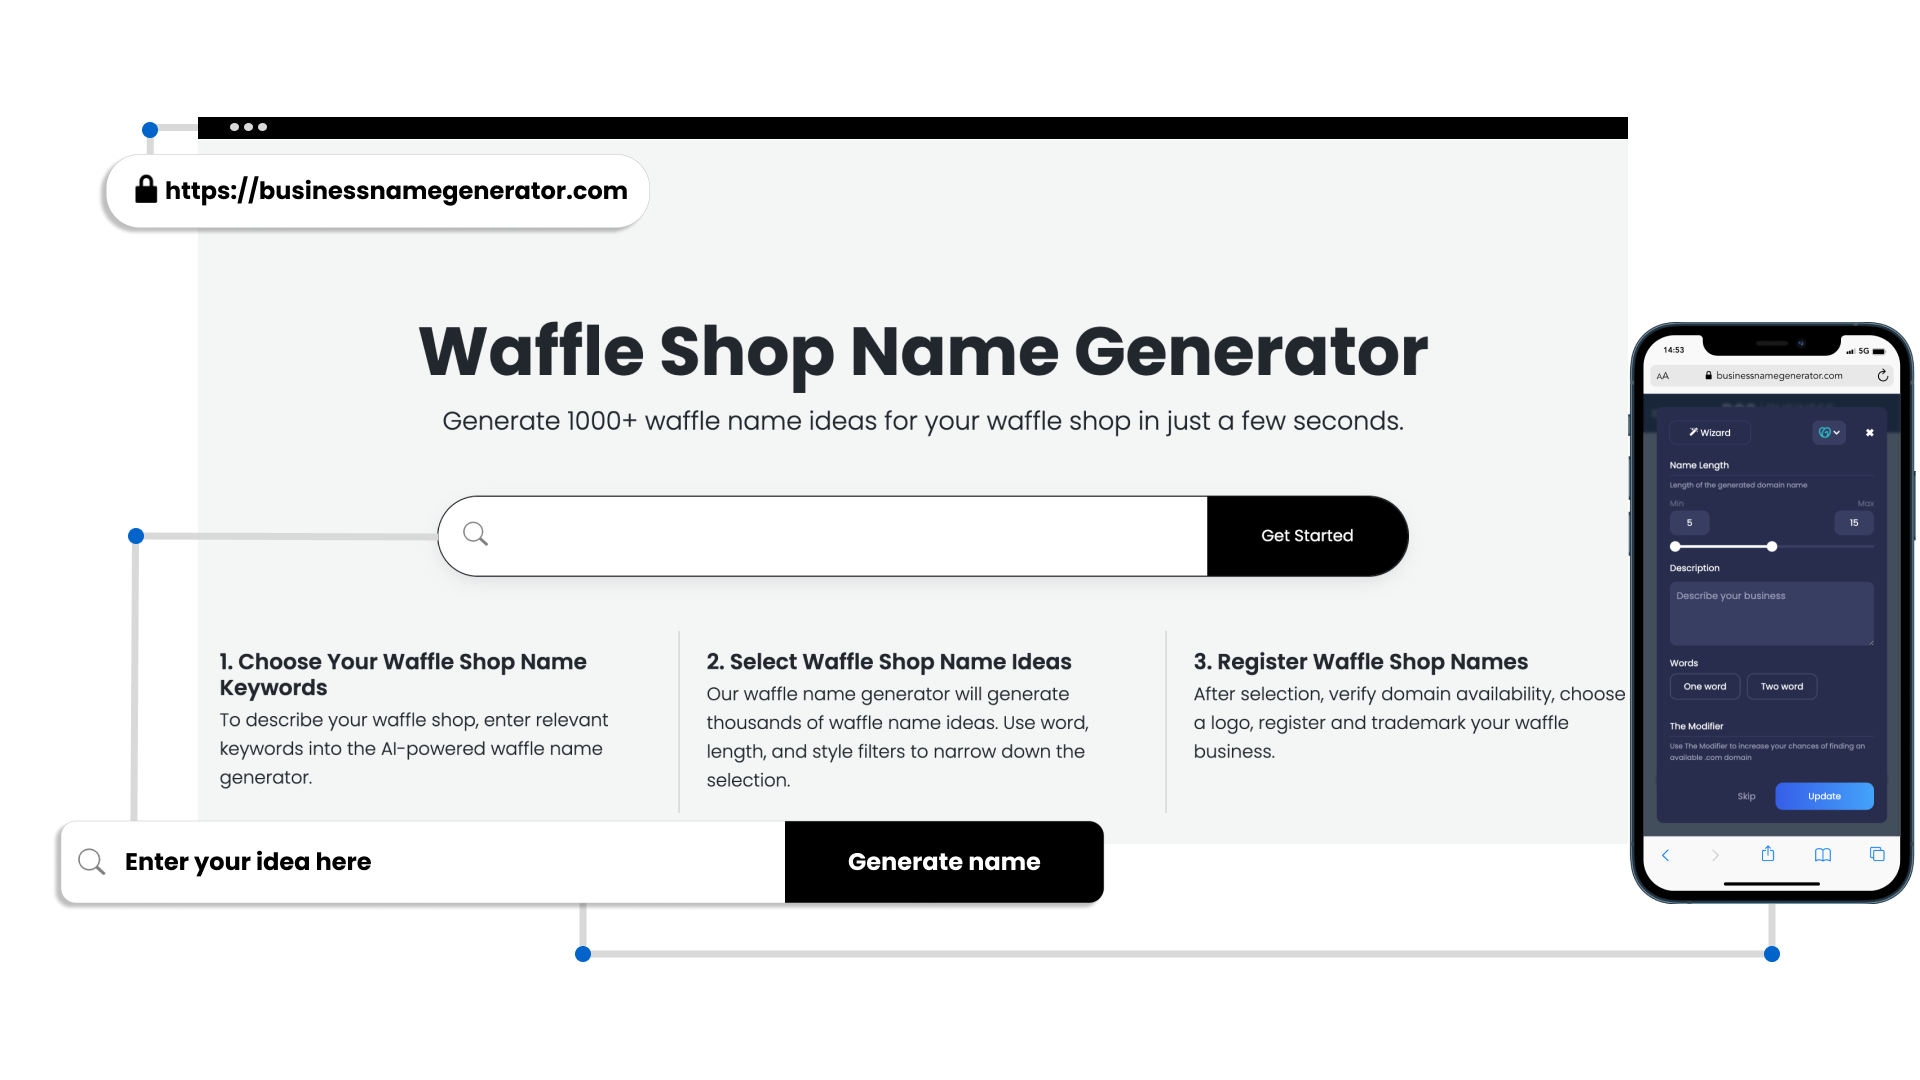 How to use our Waffle Shop Name Generator